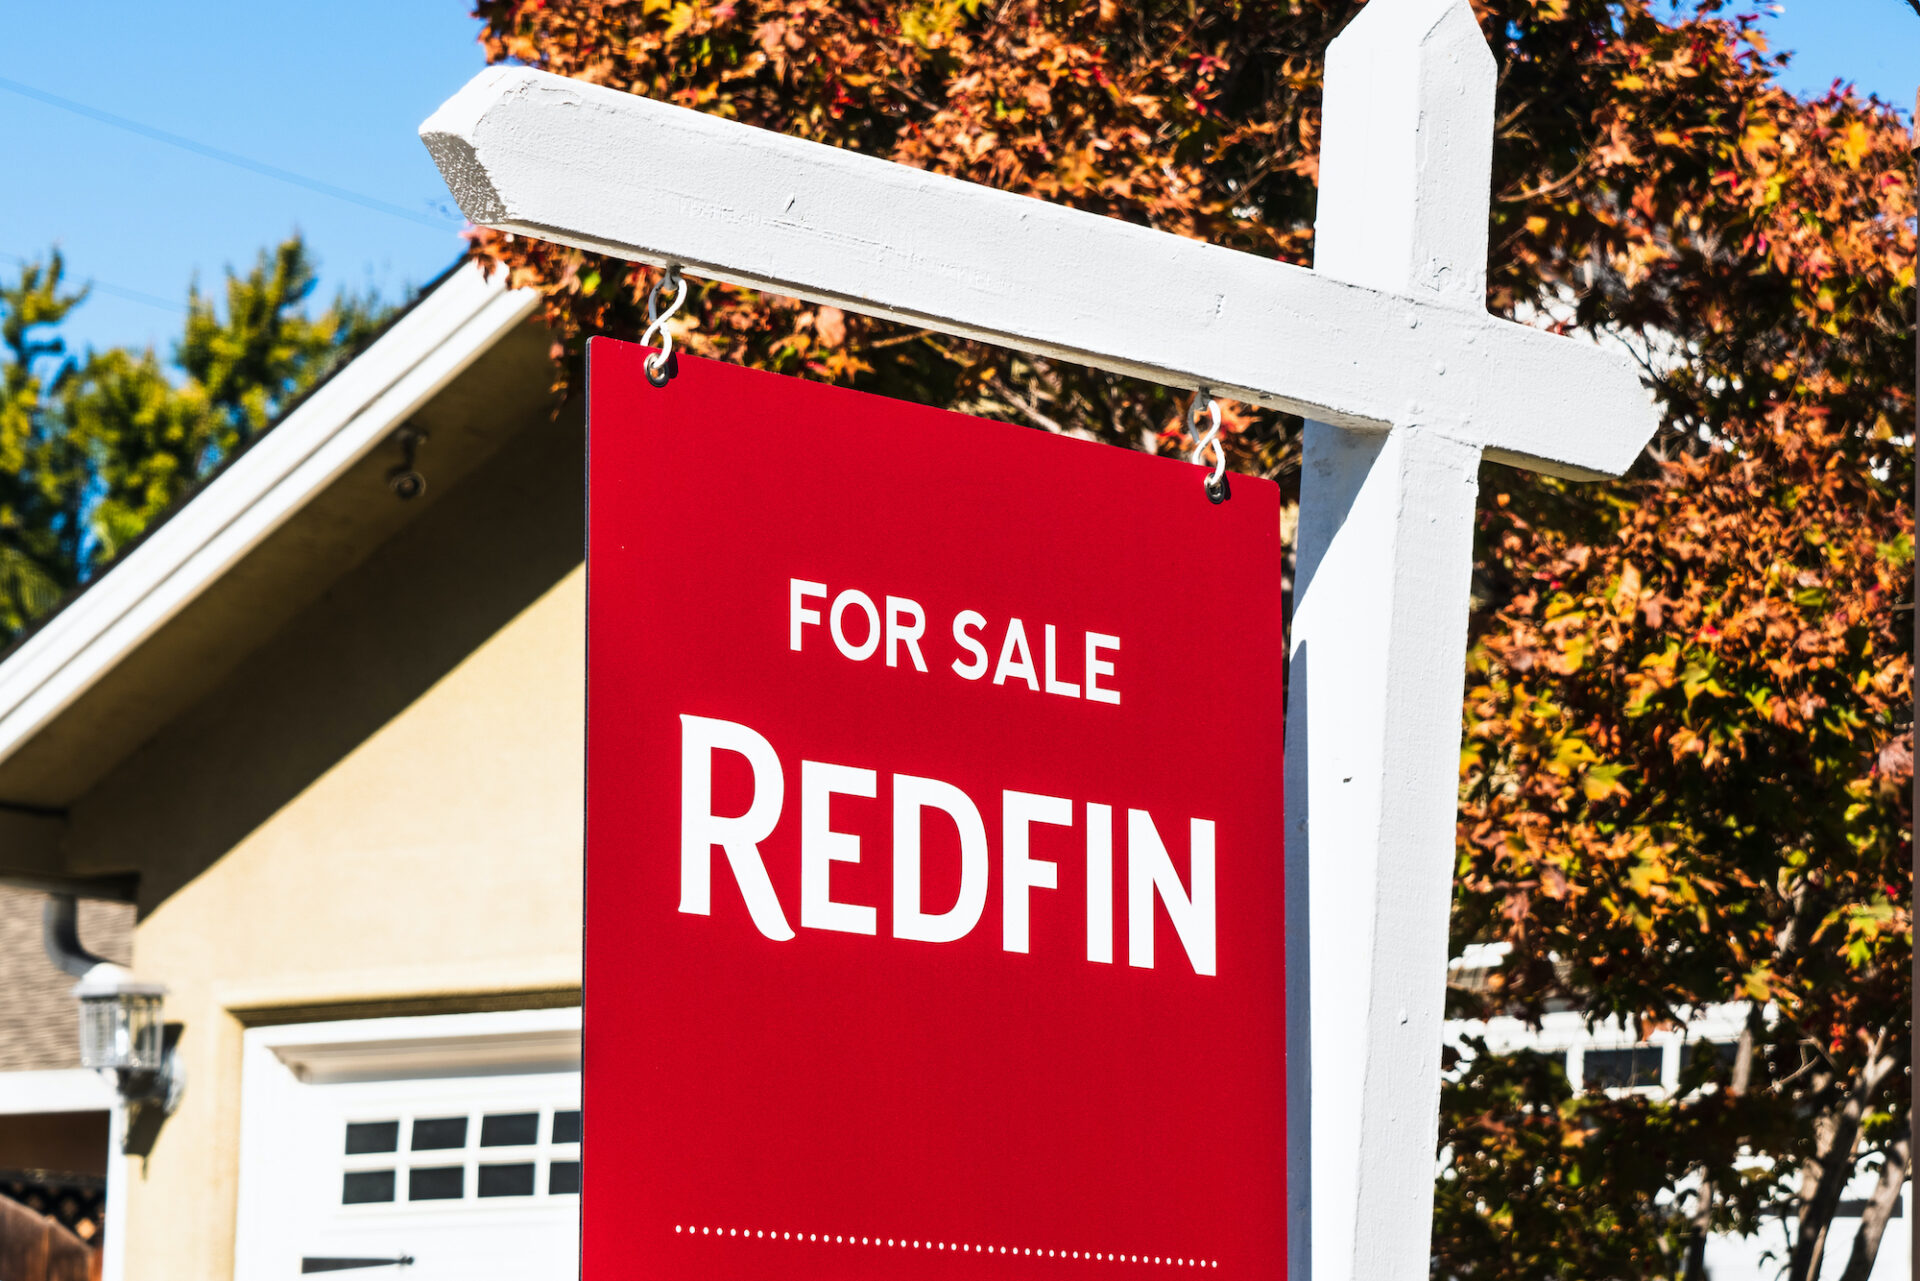 Redfin Posts Third Quarter Earnings